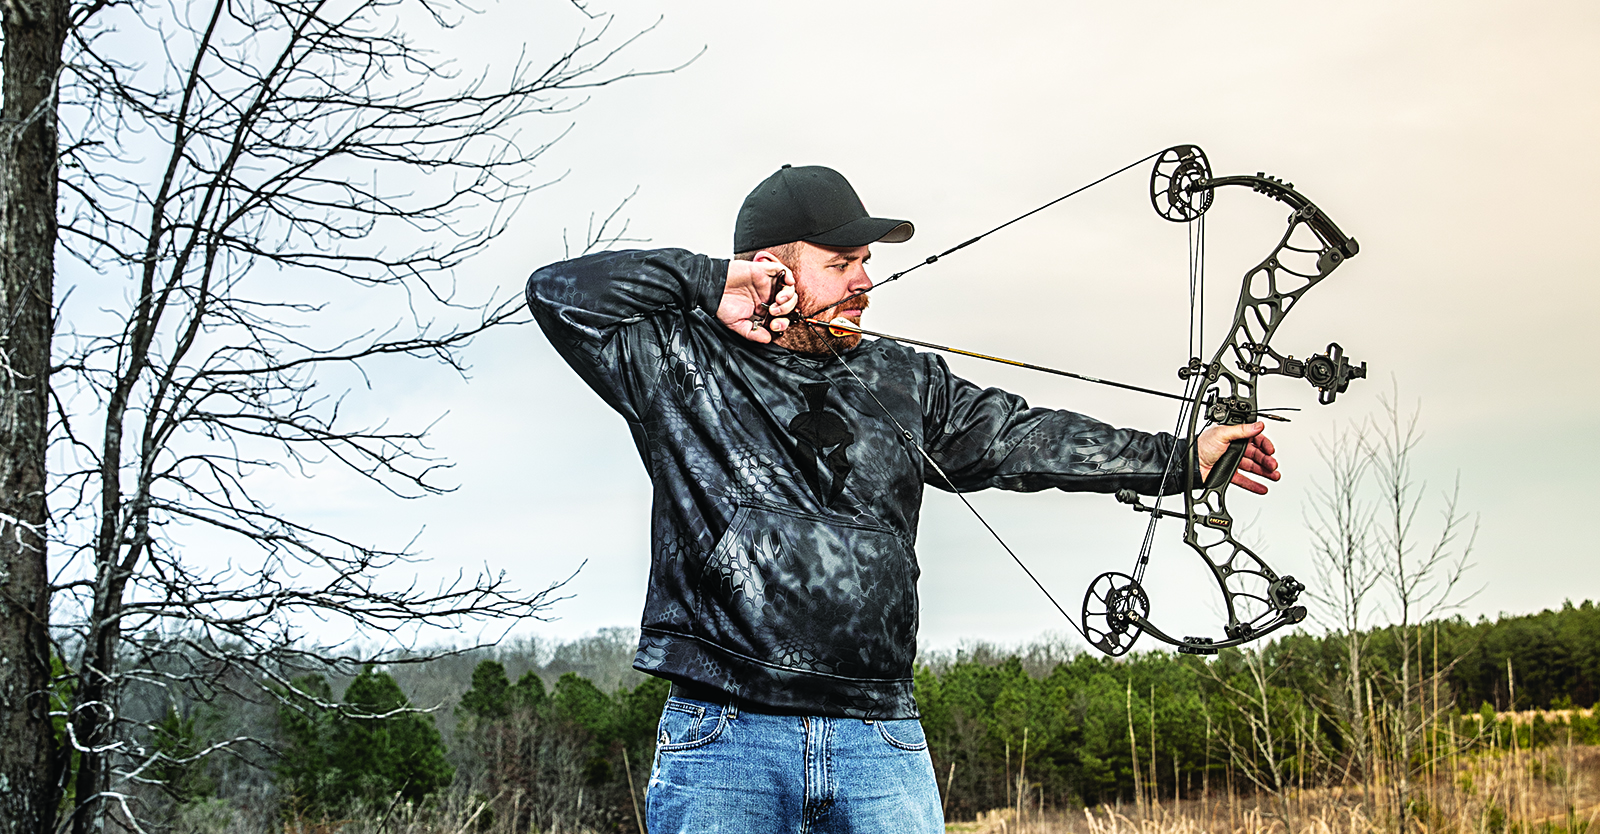 Bowhunter drawing back on a compound bow.